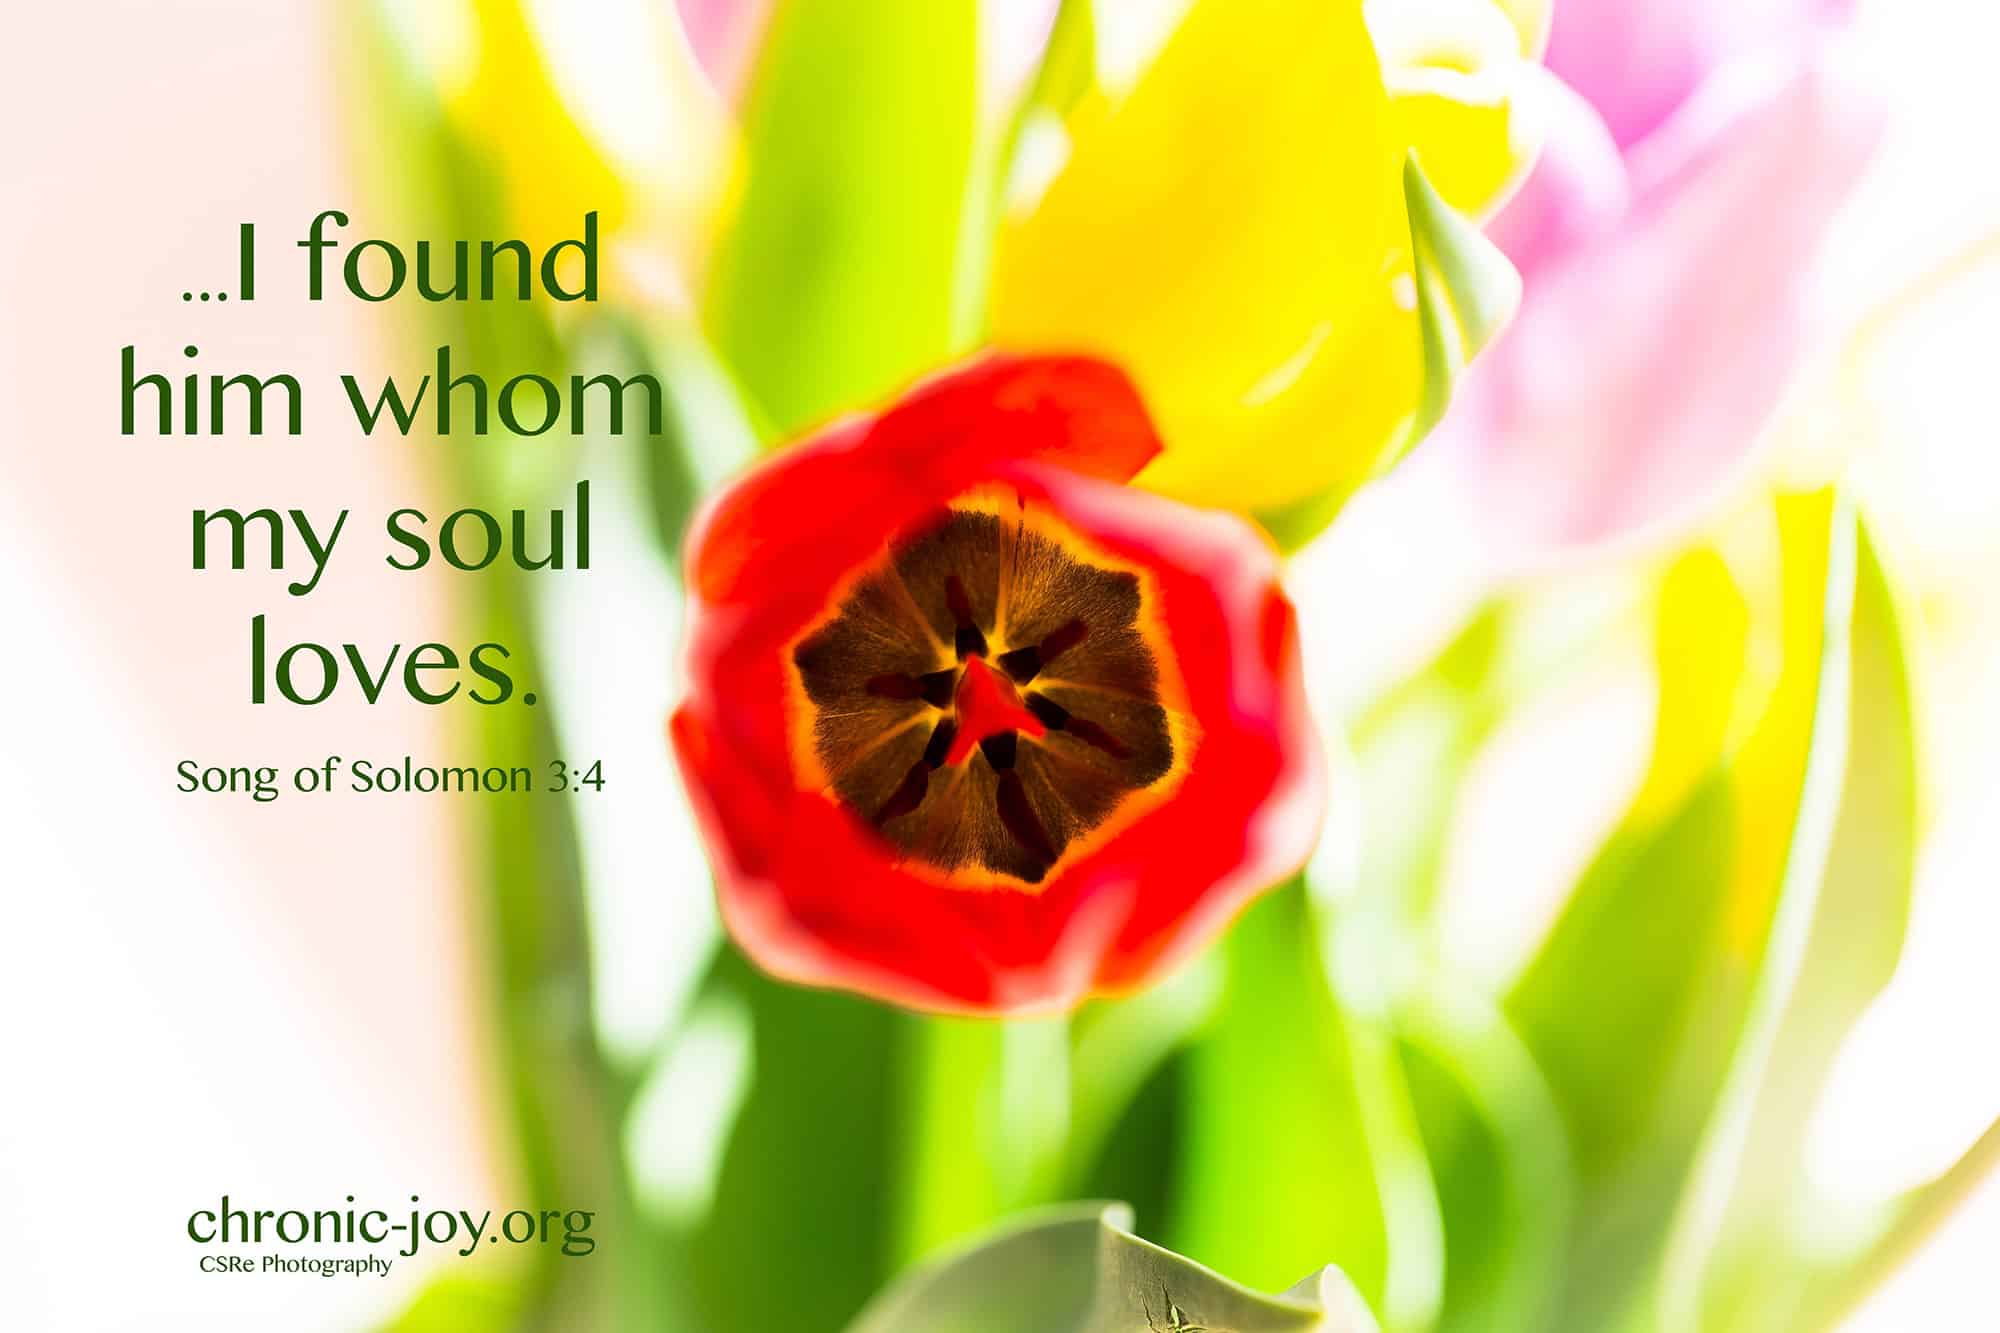 ...I found whom my soul loves. Song of Solomon 3:4